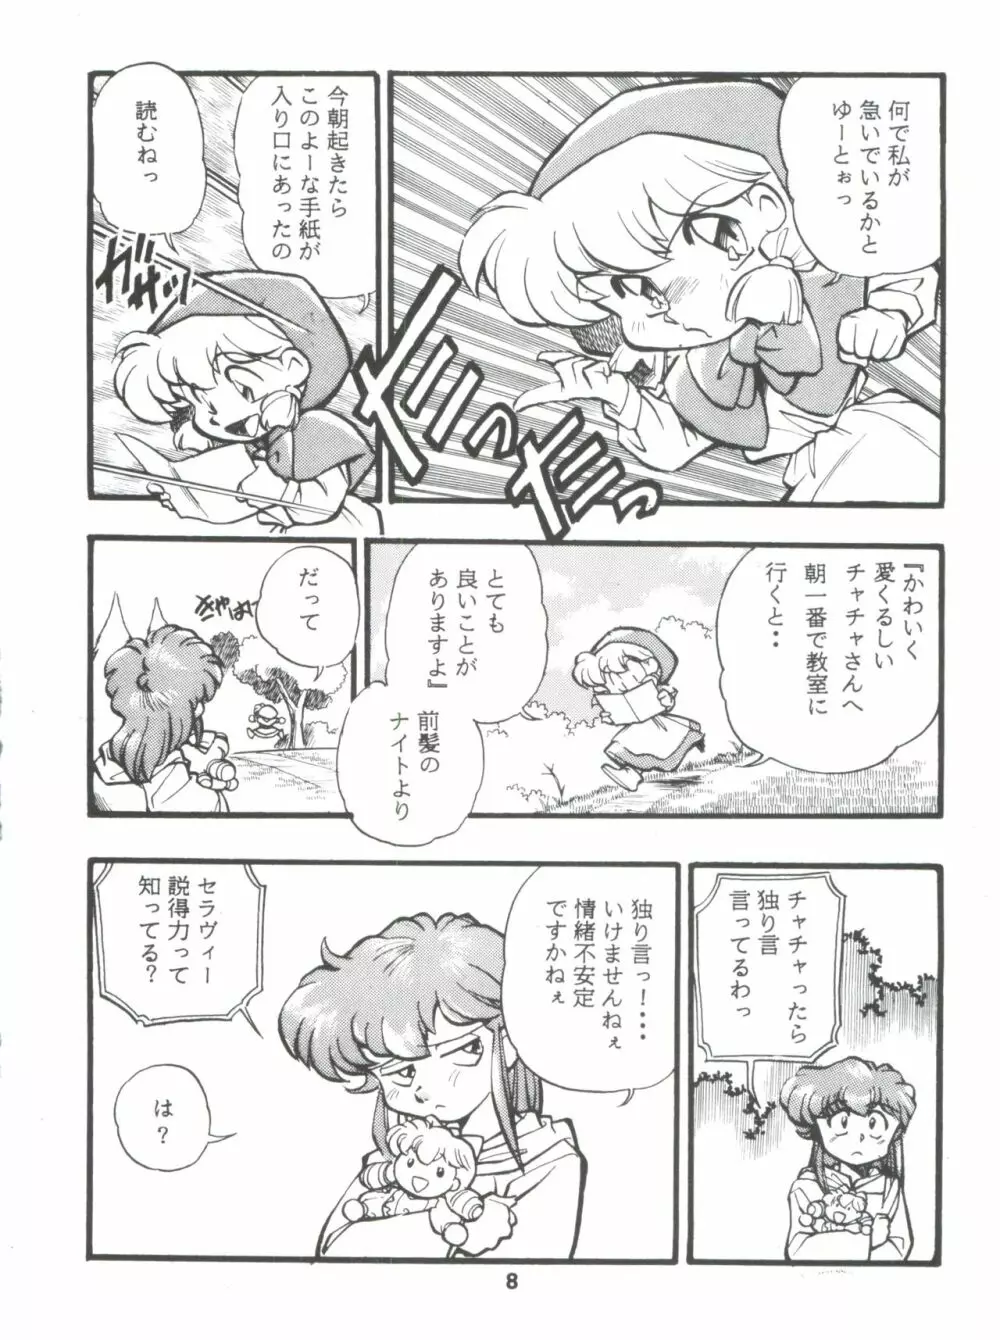 DK・1 III Page.8